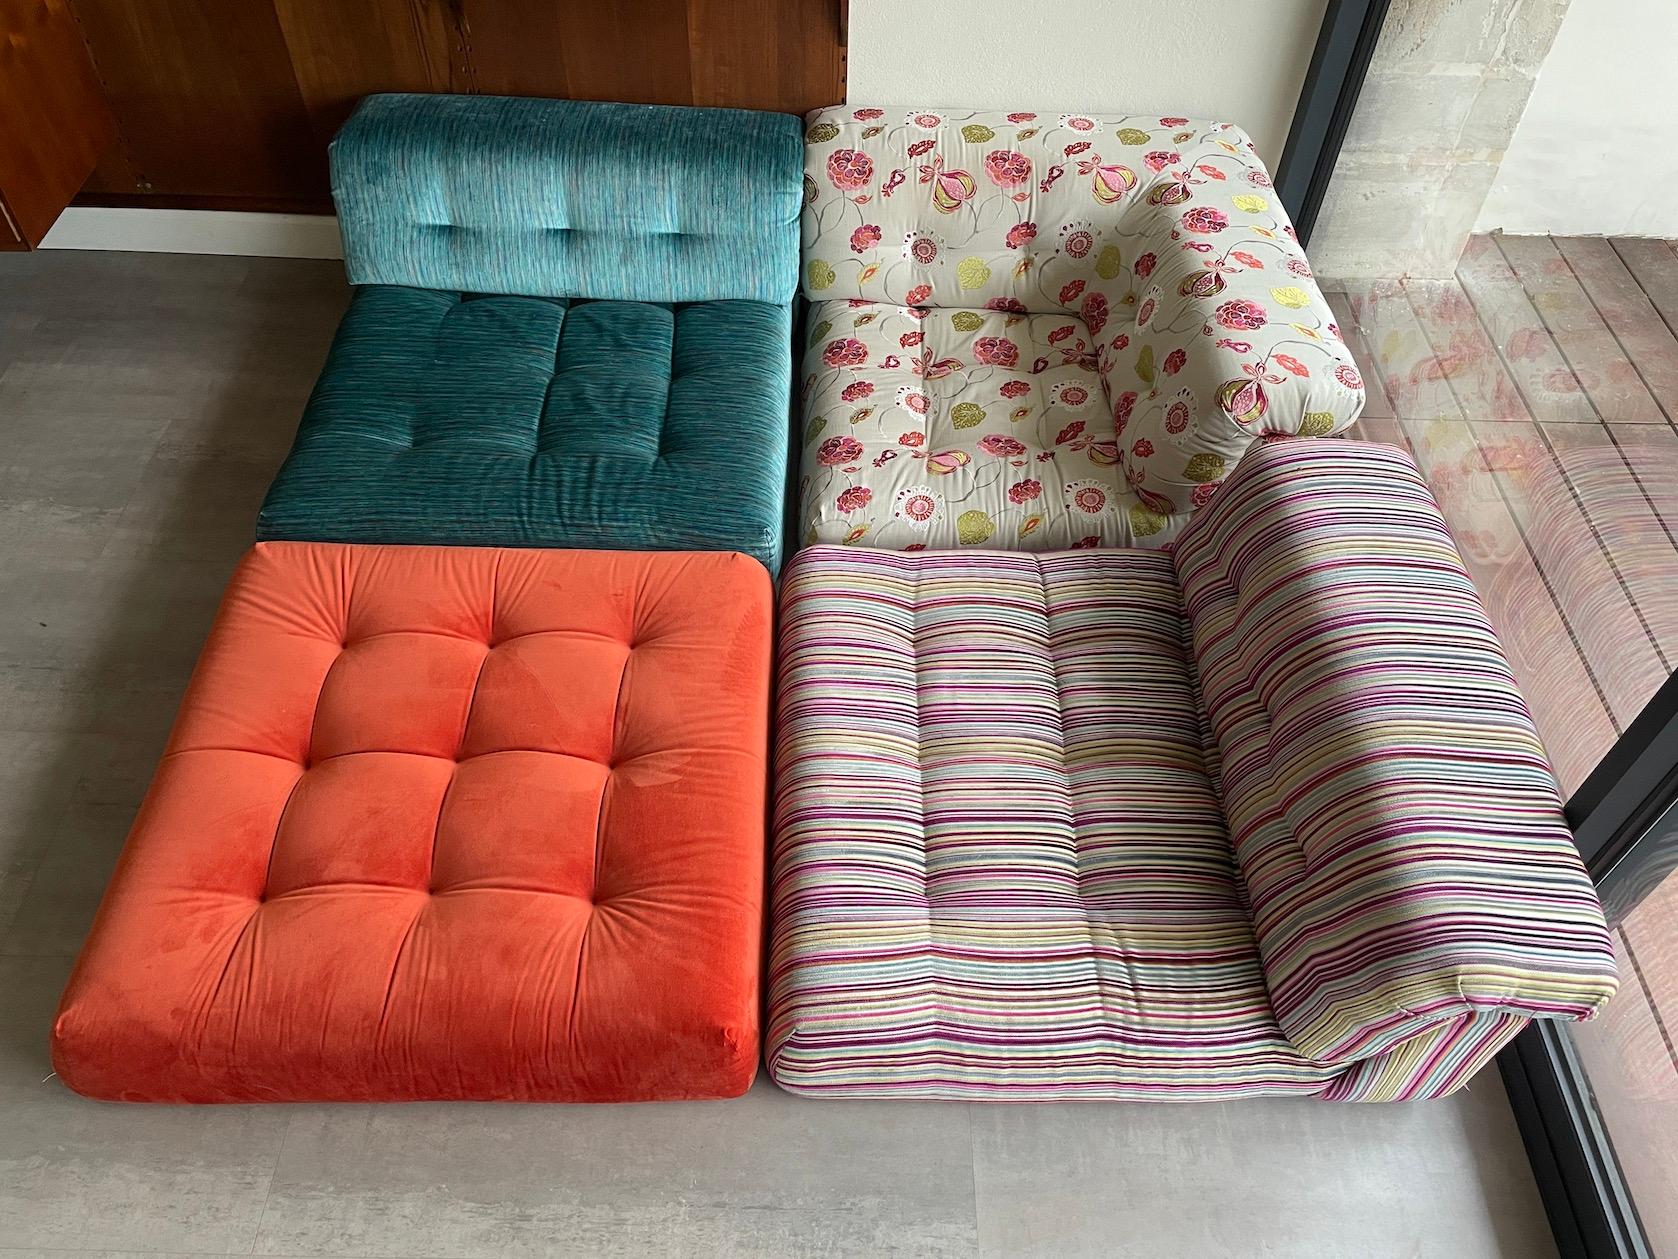 Mah Jong set composable by elements, dressed in blue, orange, floral and multicolored stripes fabrics. Fully modular system, it can be composed from four seat cushions at ground level: a corner cushion with backrest, two cushions with straight